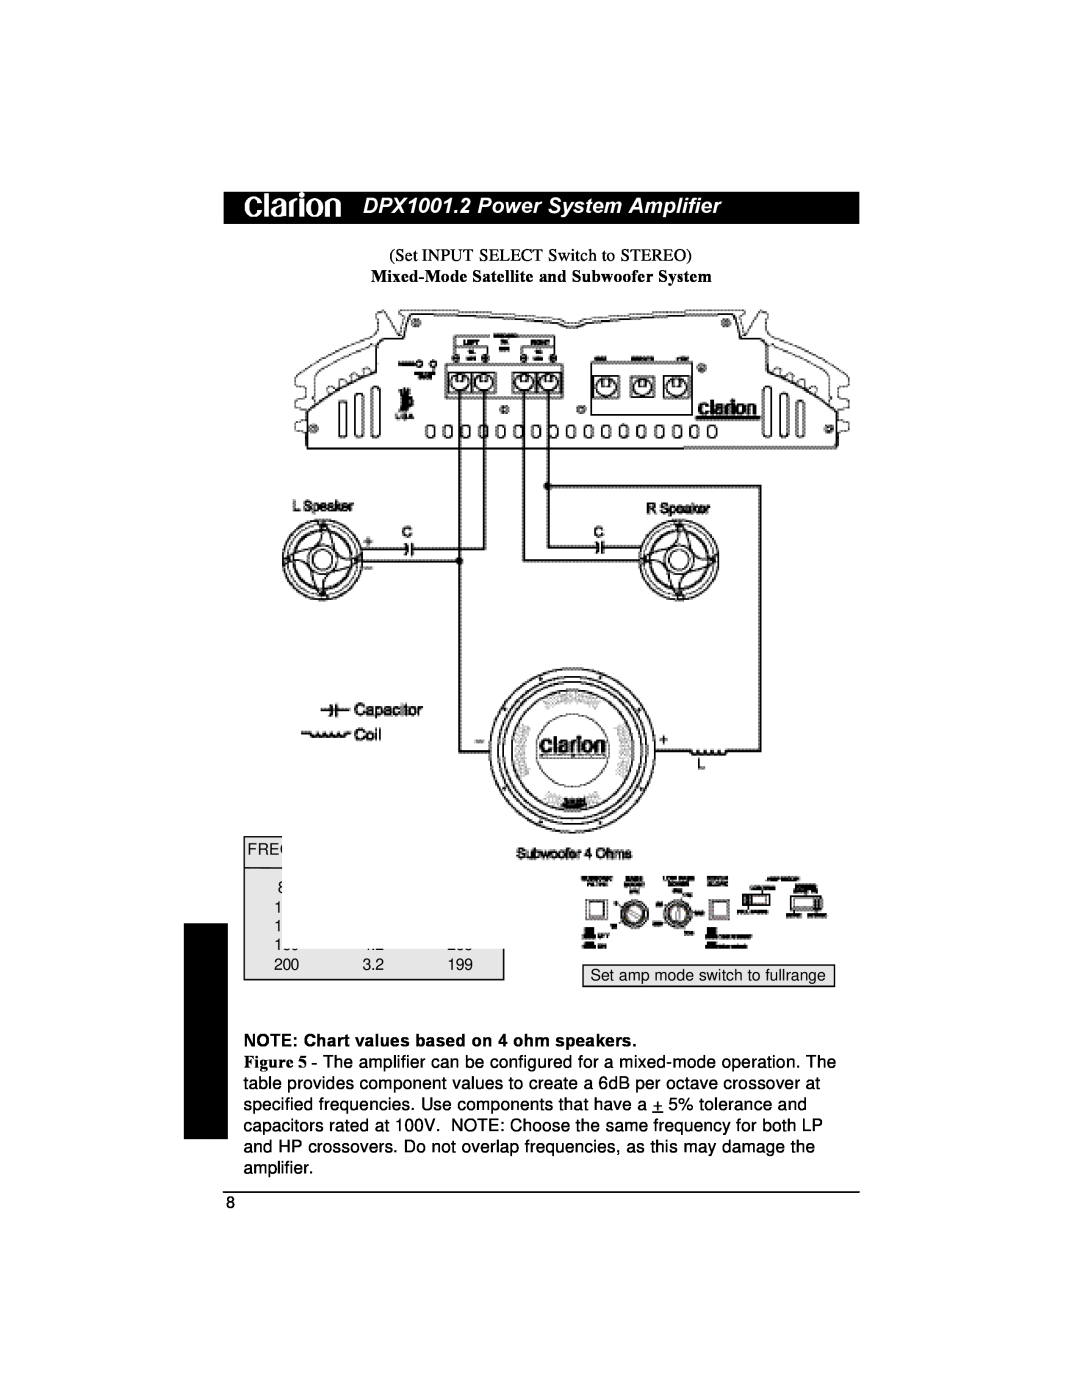 Clarion installation manual Mixed-ModeSatellite and Subwoofer System, DPX1001.2 Power System Amplifier 